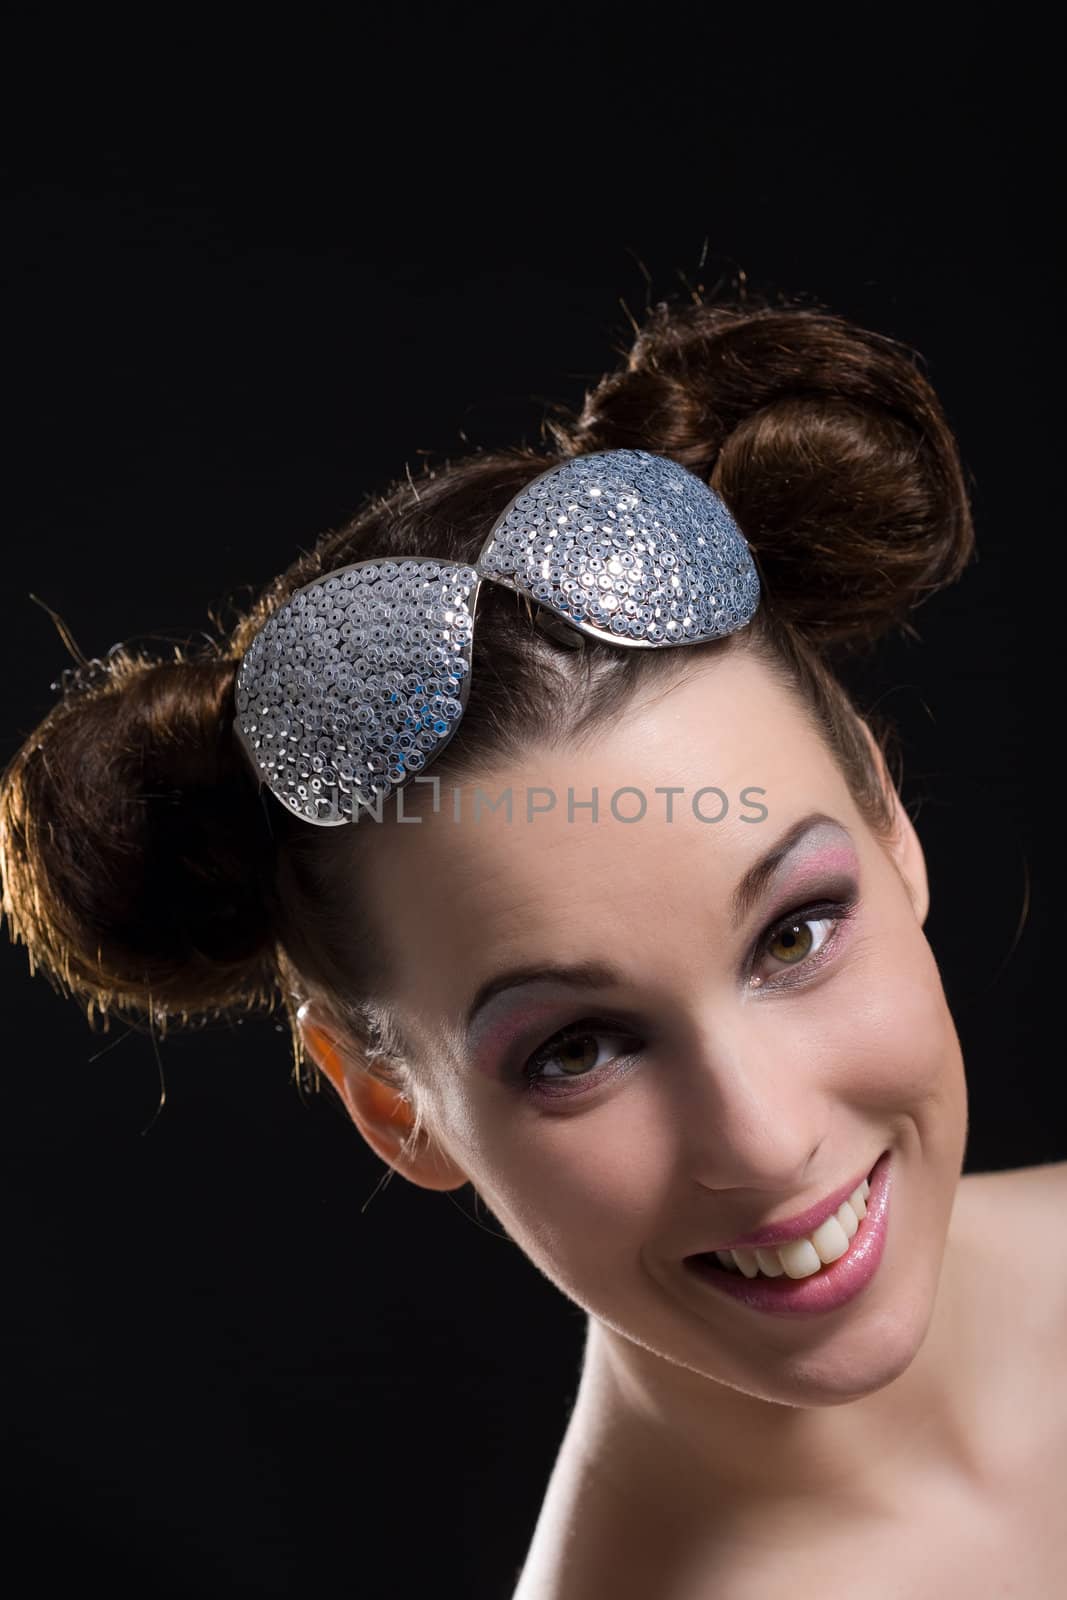 Woman with funny hairstyle looking cheeky